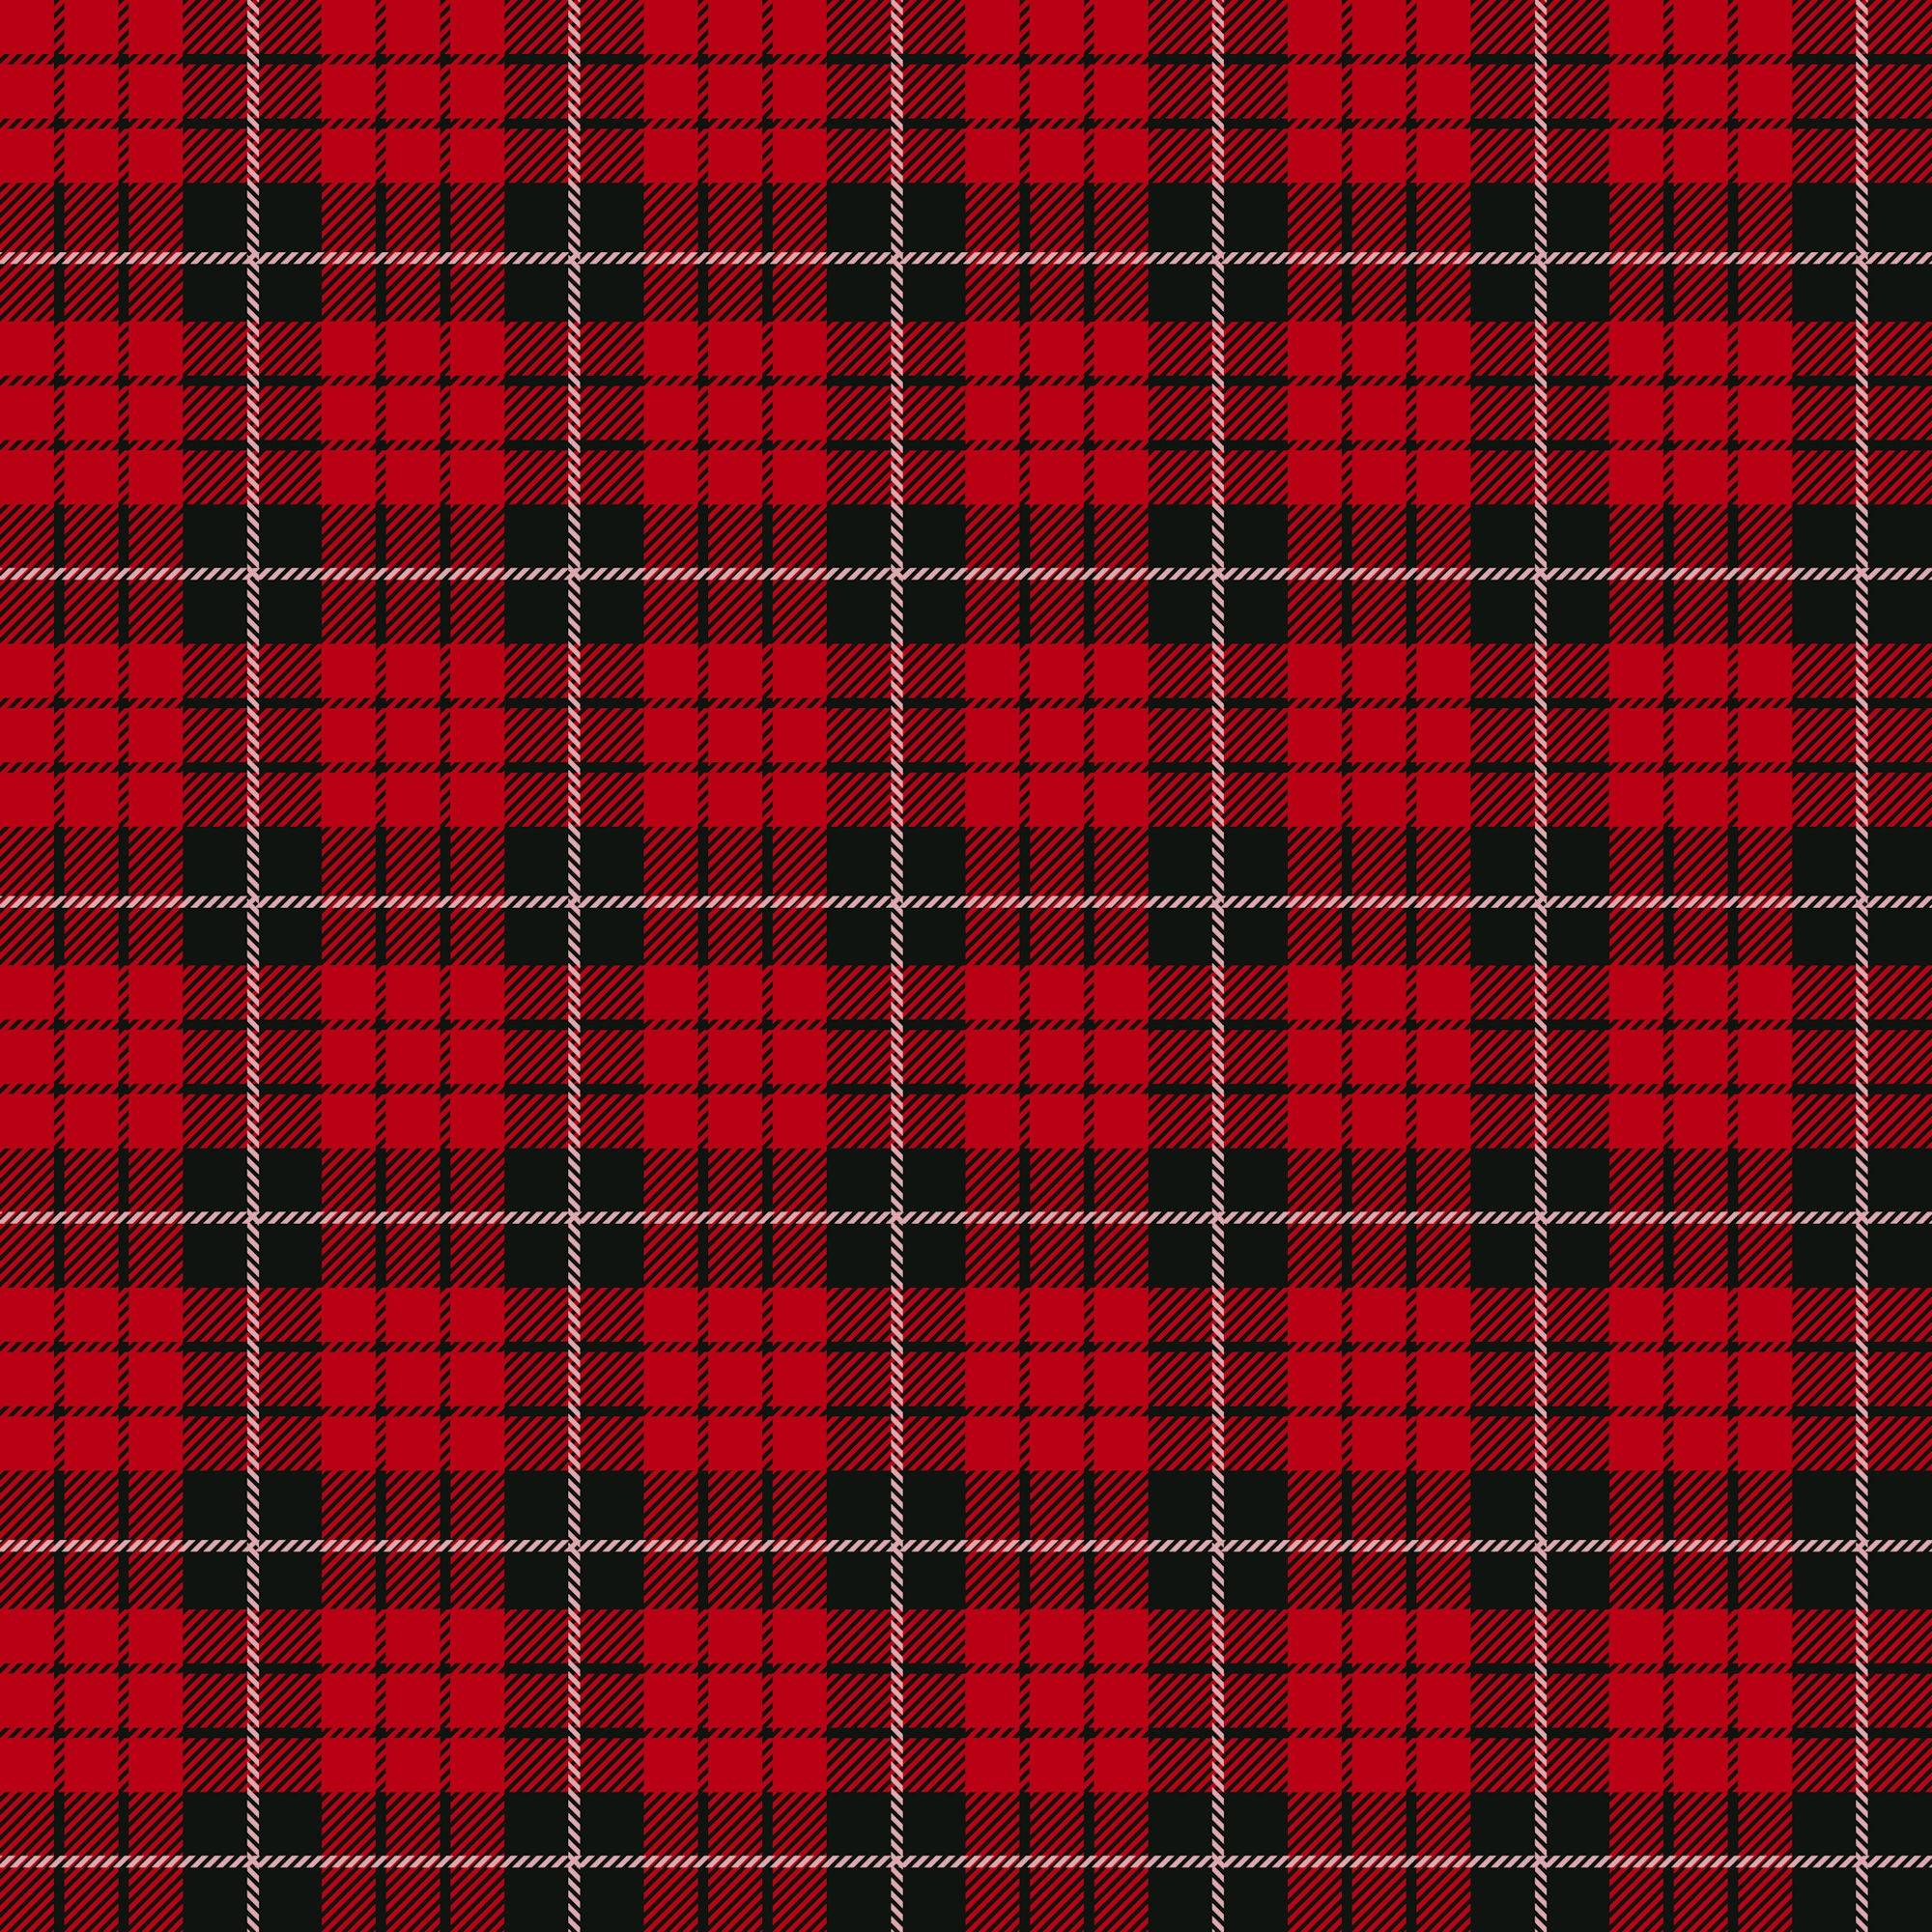 Buffalo Plaid Christmas Mini Collection Reindeer 12 x 12 Double-Sided Scrapbook Paper by SSC Designs - Scrapbook Supply Companies